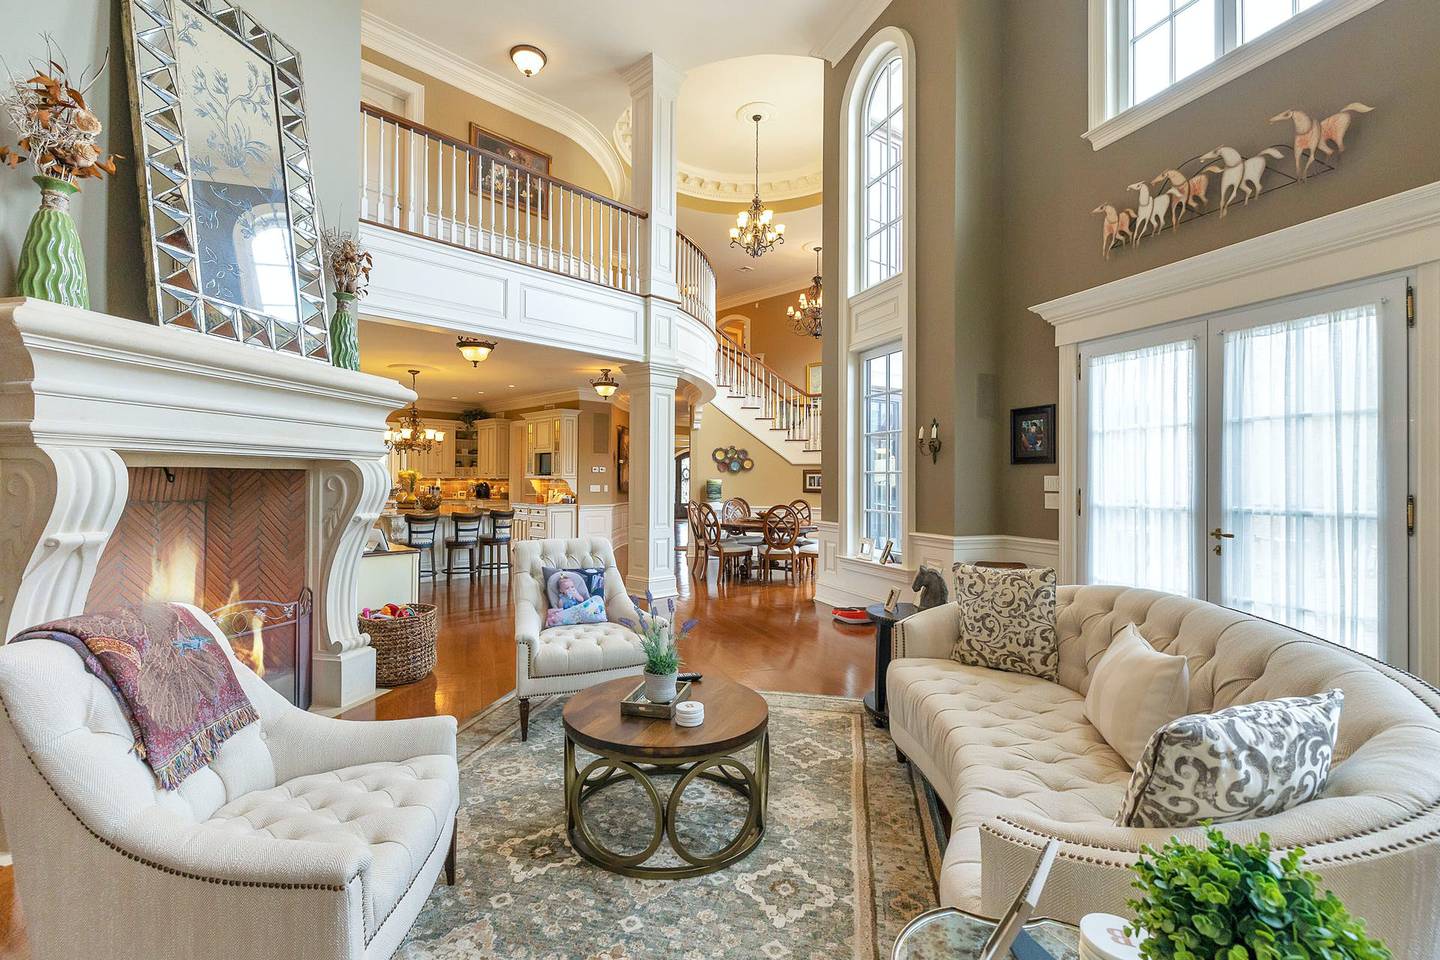 The house has been lavishly furnished. Photo: Douglas Elliman Realty